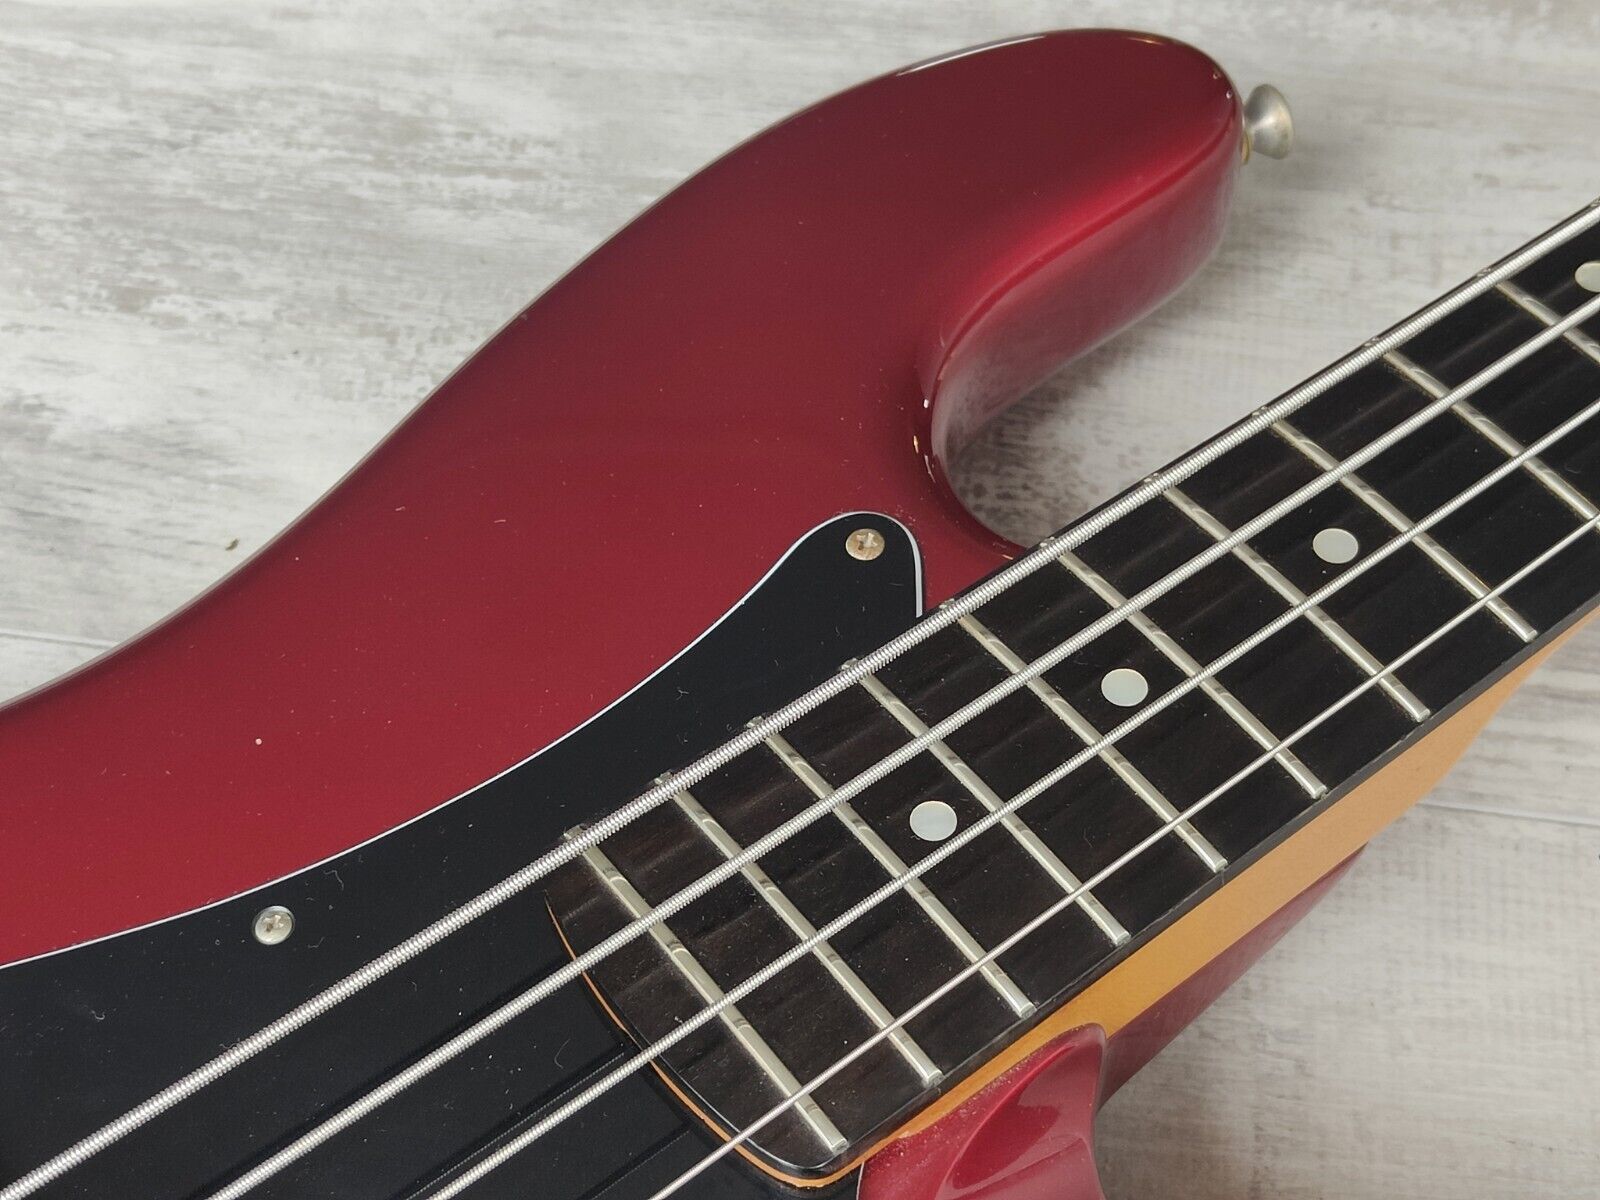 1988 Schecter Japan Precision Bass w/EMG's (Candy Apple Red)